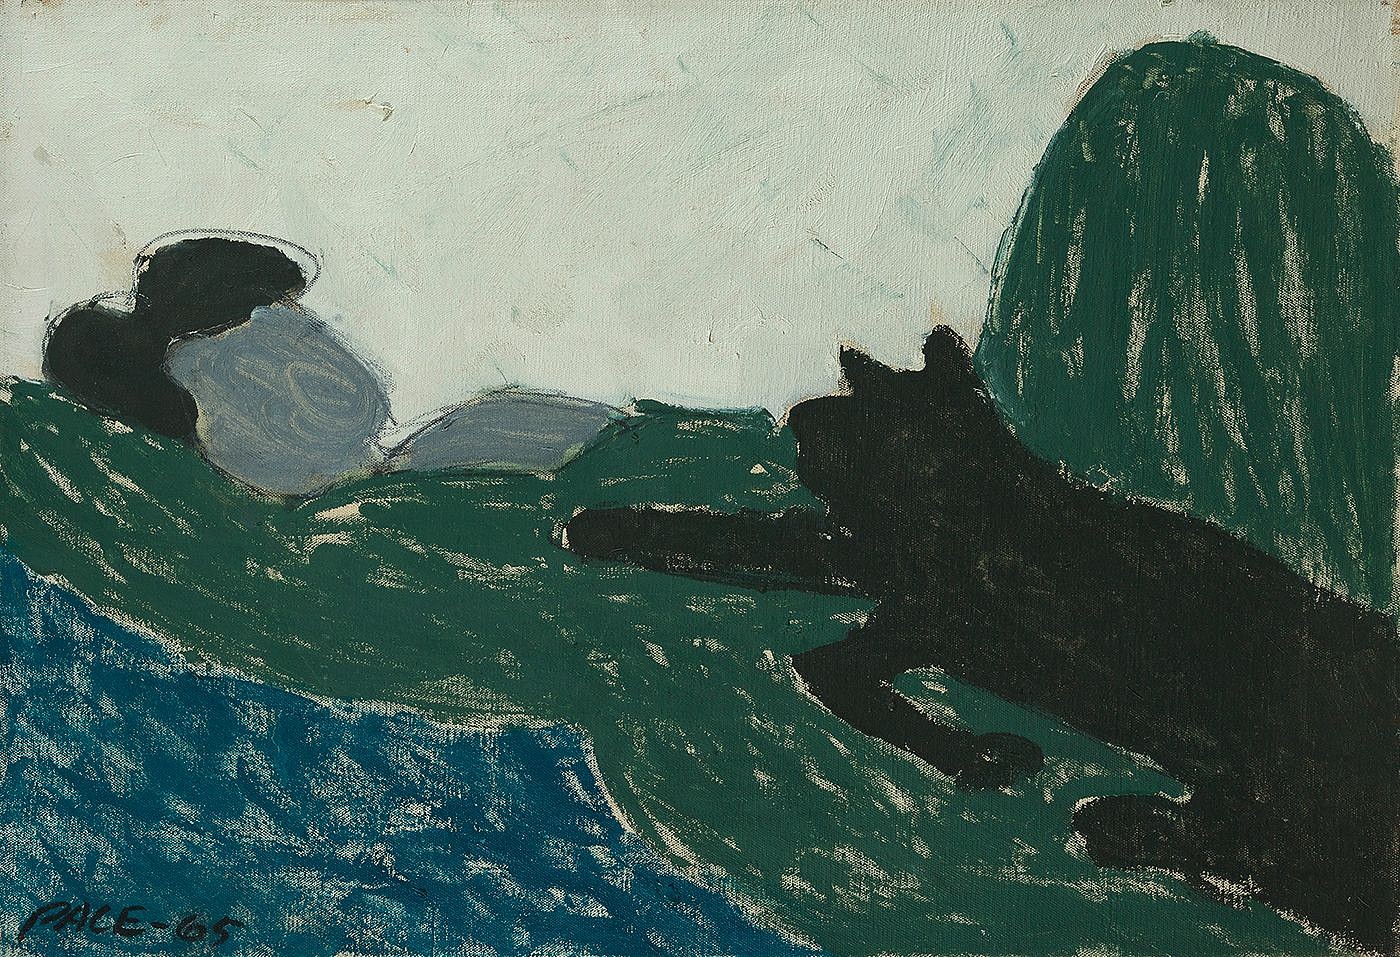 Stephen Pace, Reclining Woman with Black Cat (65-1A), 1965
Oil on canvas, 16 1/2 x 23 3/8 in. (41.9 x 59.4 cm)
PAC-00070